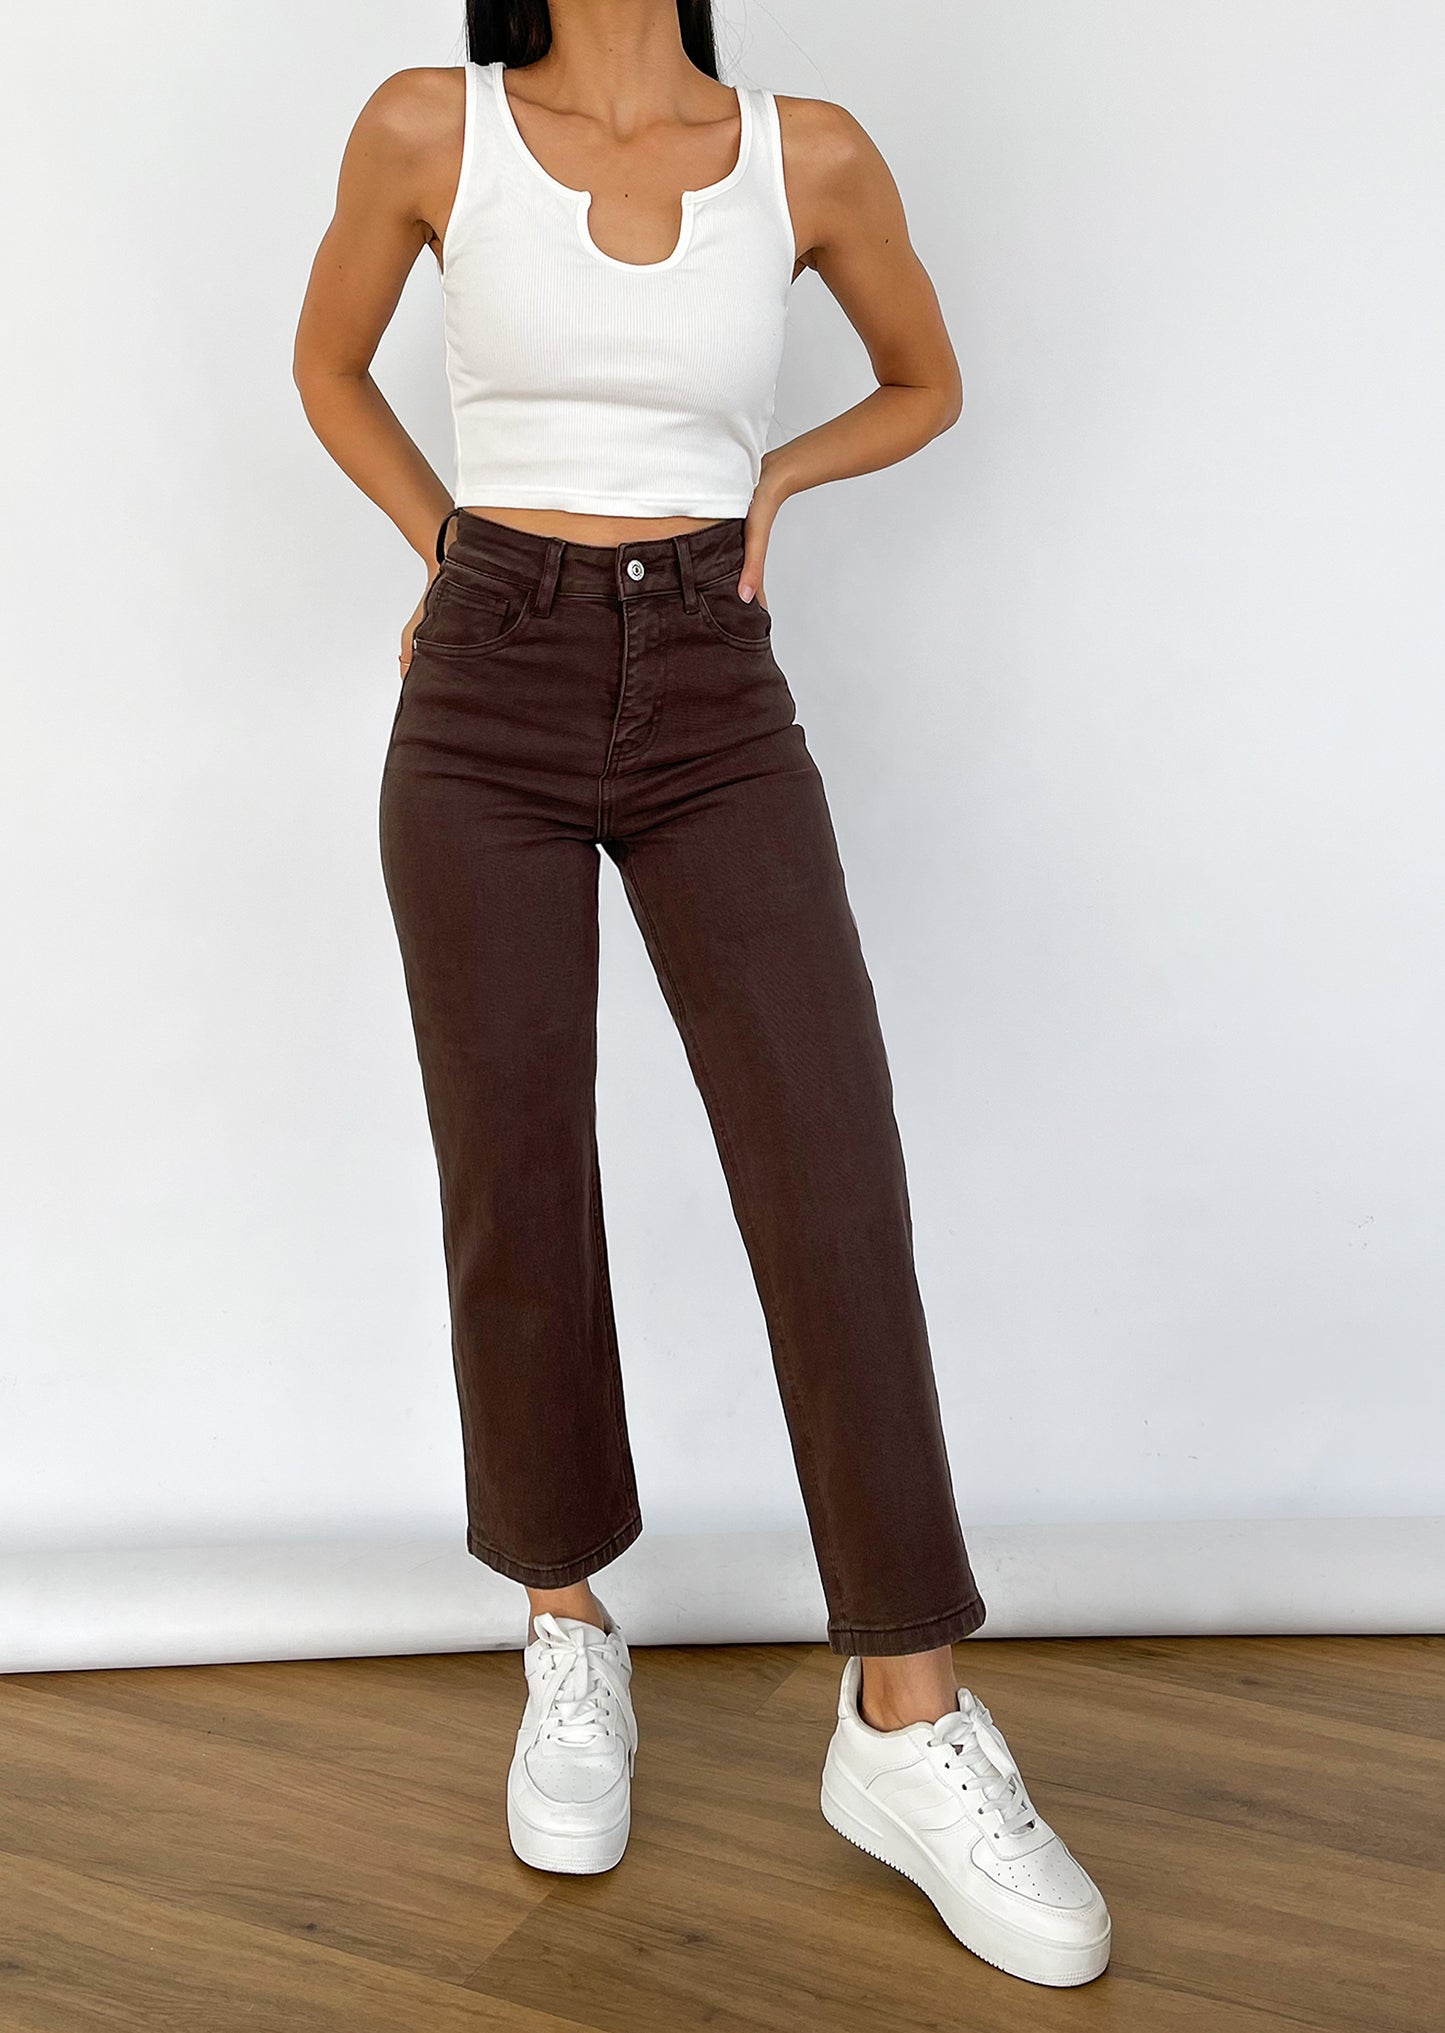 Dad jeans in brown